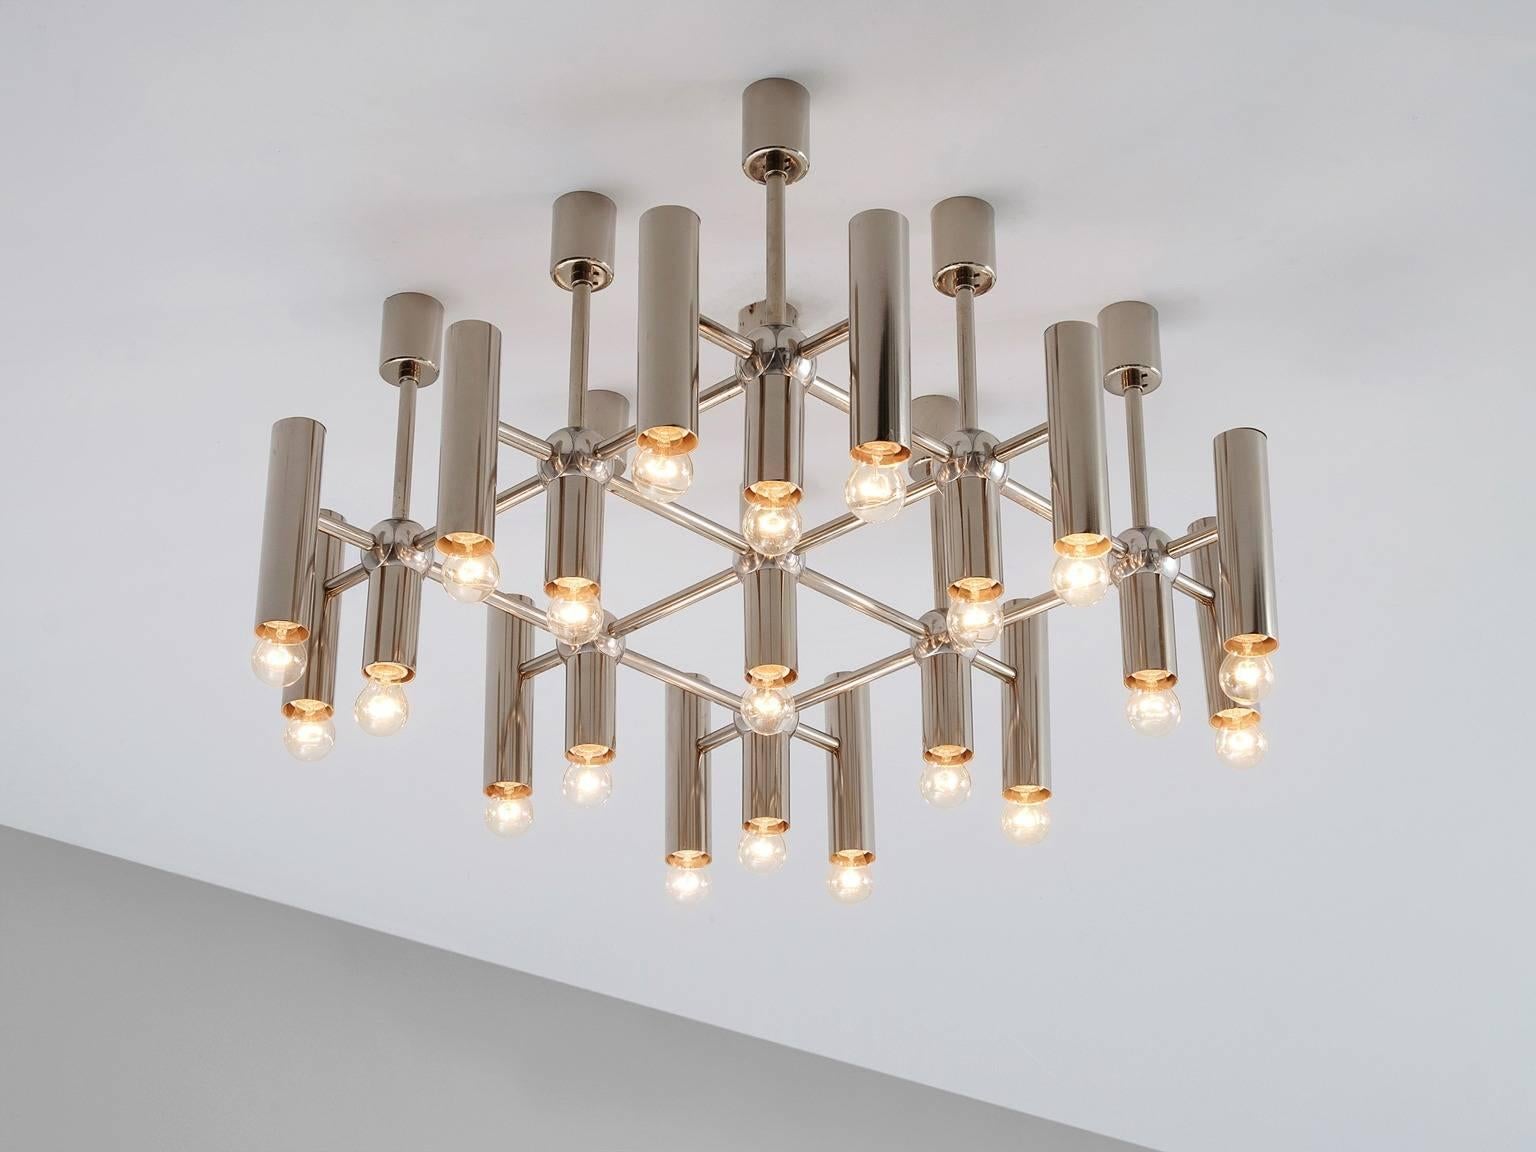 Chandelier in nickel-plated steel, Germany 1970s. 

Chandelier in nickel-plated steel. Stunning modern design. The chandelier consists of 21 lights, arranged in a symmetrical pattern. The large amount of lights is beautifully reflected by the